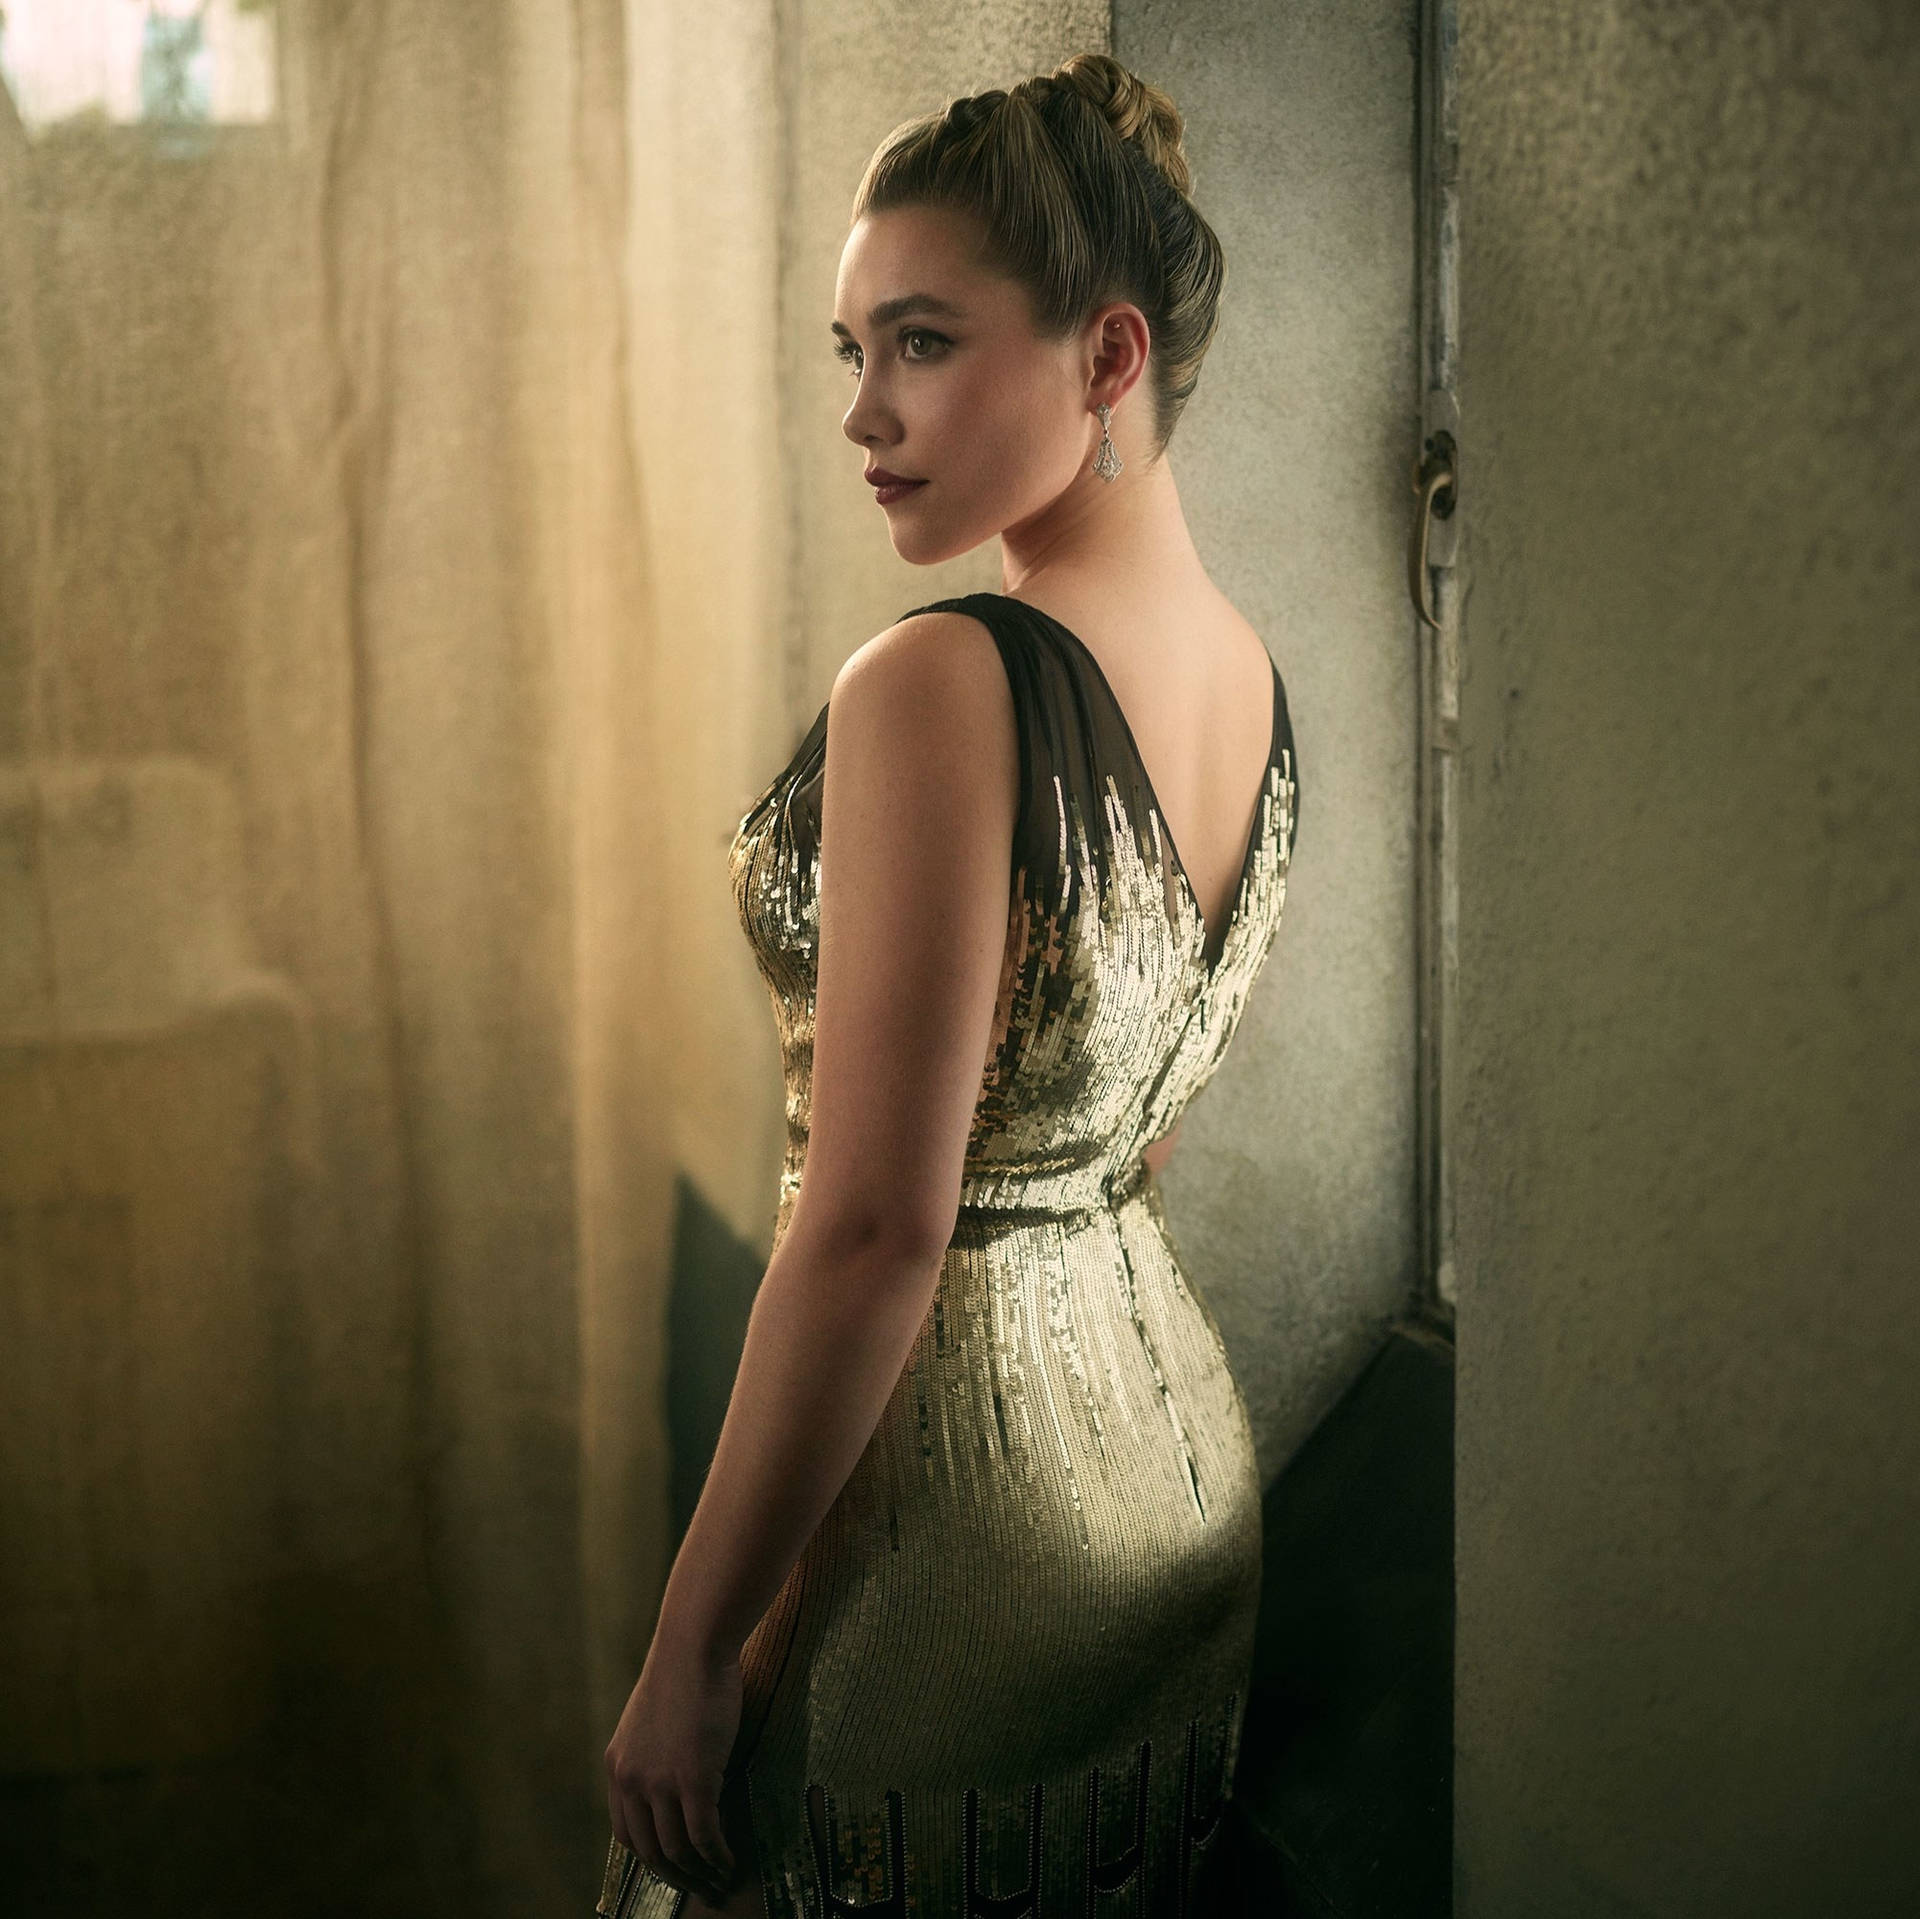 A woman in a gold dress standing in a doorway - Florence Pugh